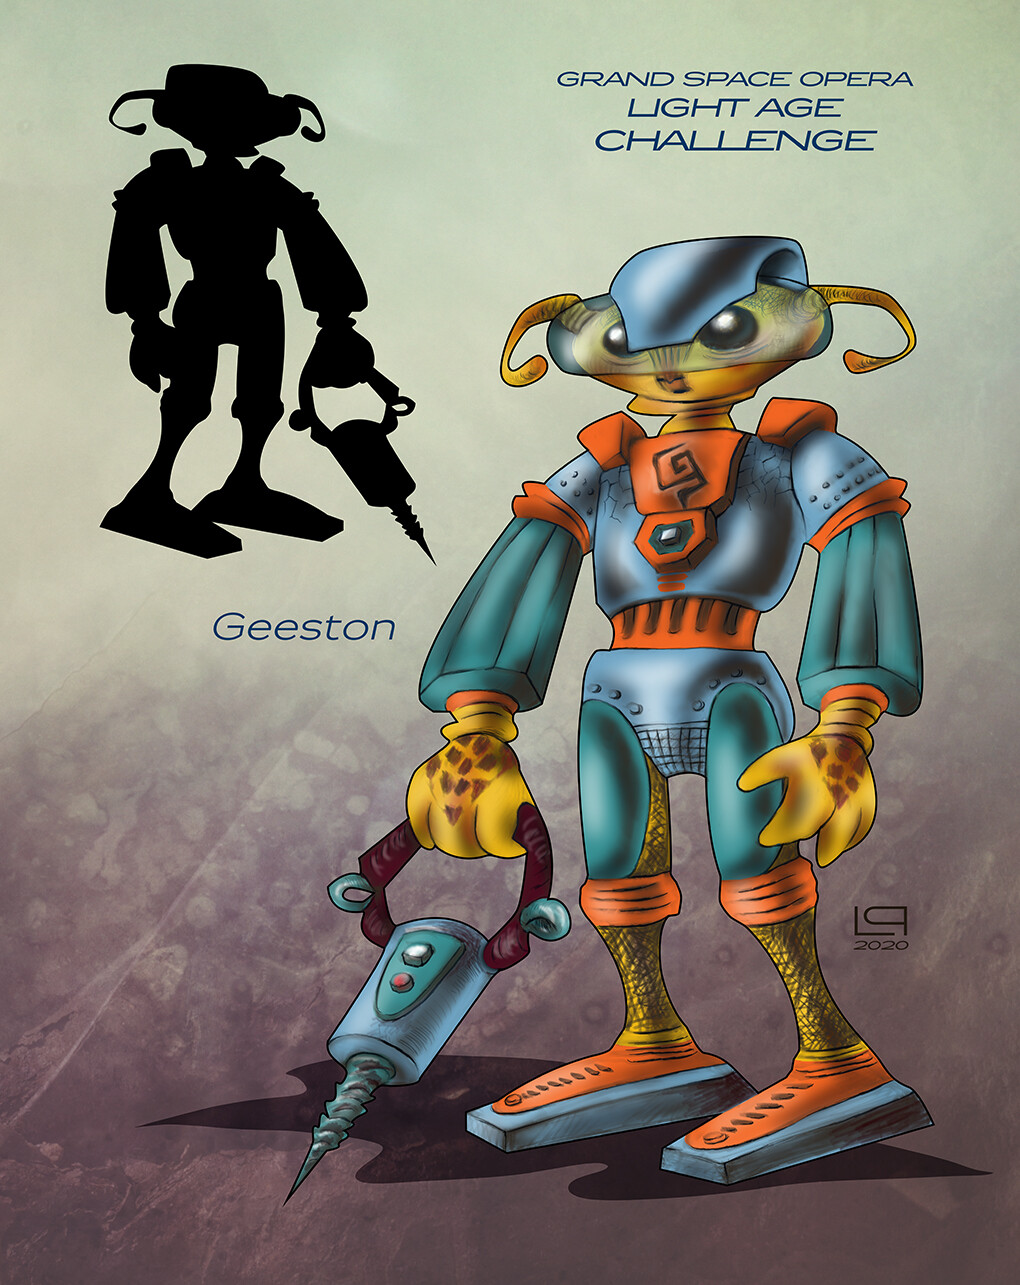 Geeston - the miner, habitant of an industrial planet in property of mining companies.